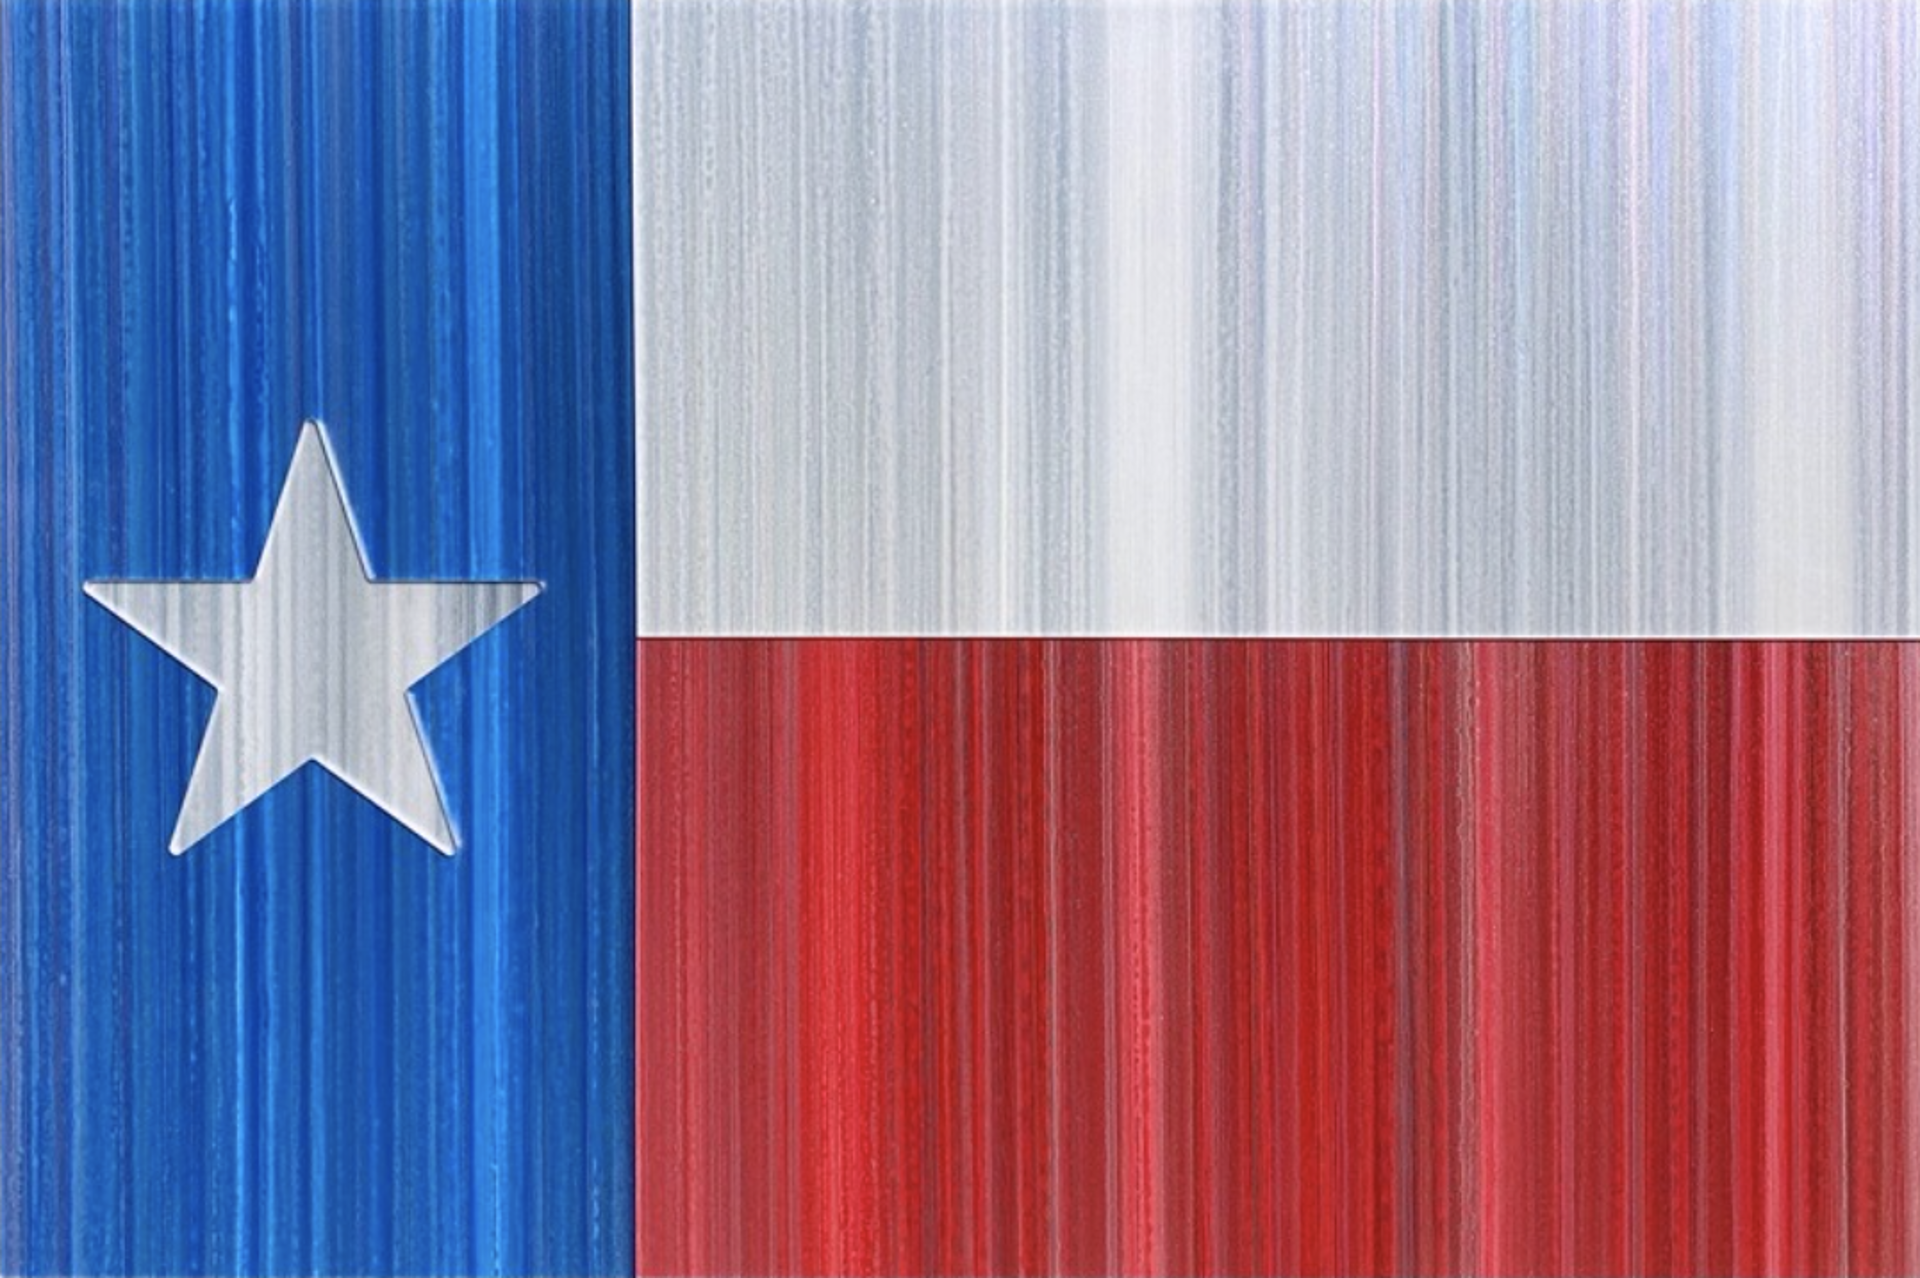 Lone Star Flag #37 by Christopher Martin